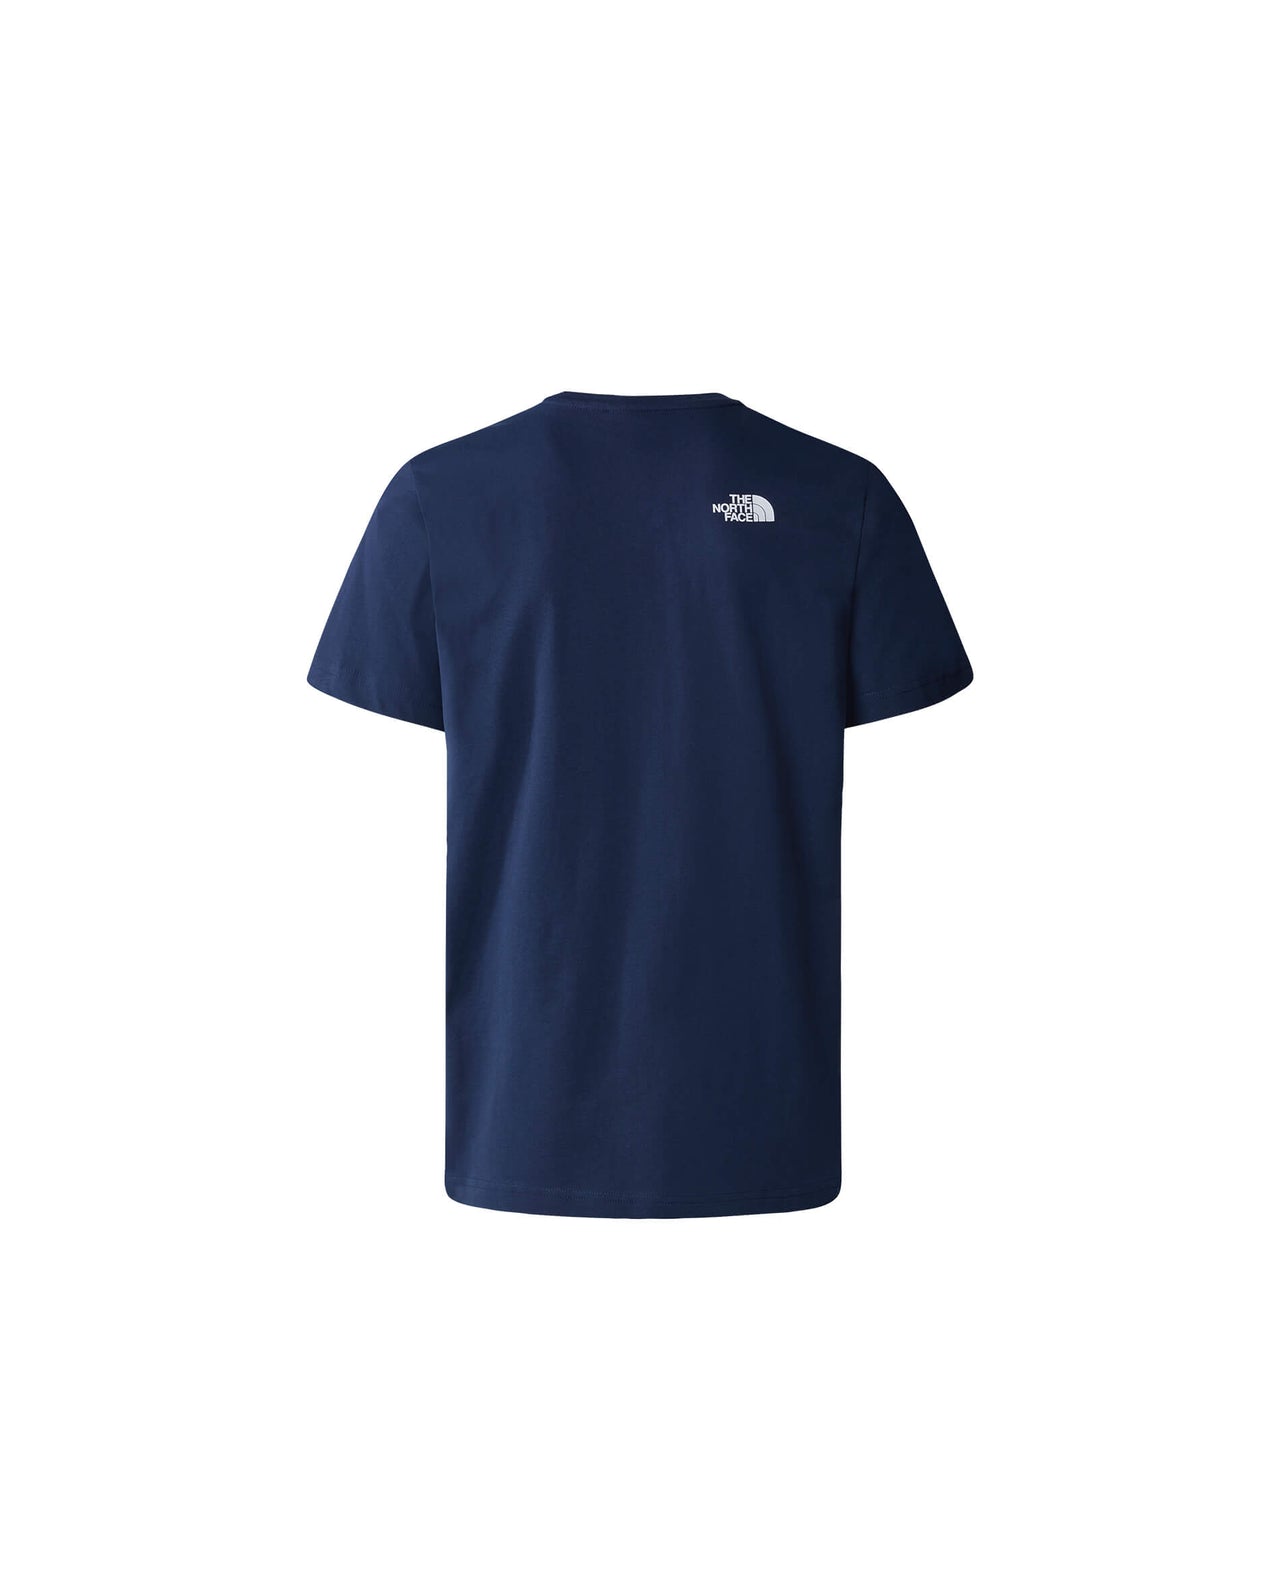 The North Face Woodcut Dome T-Shirt